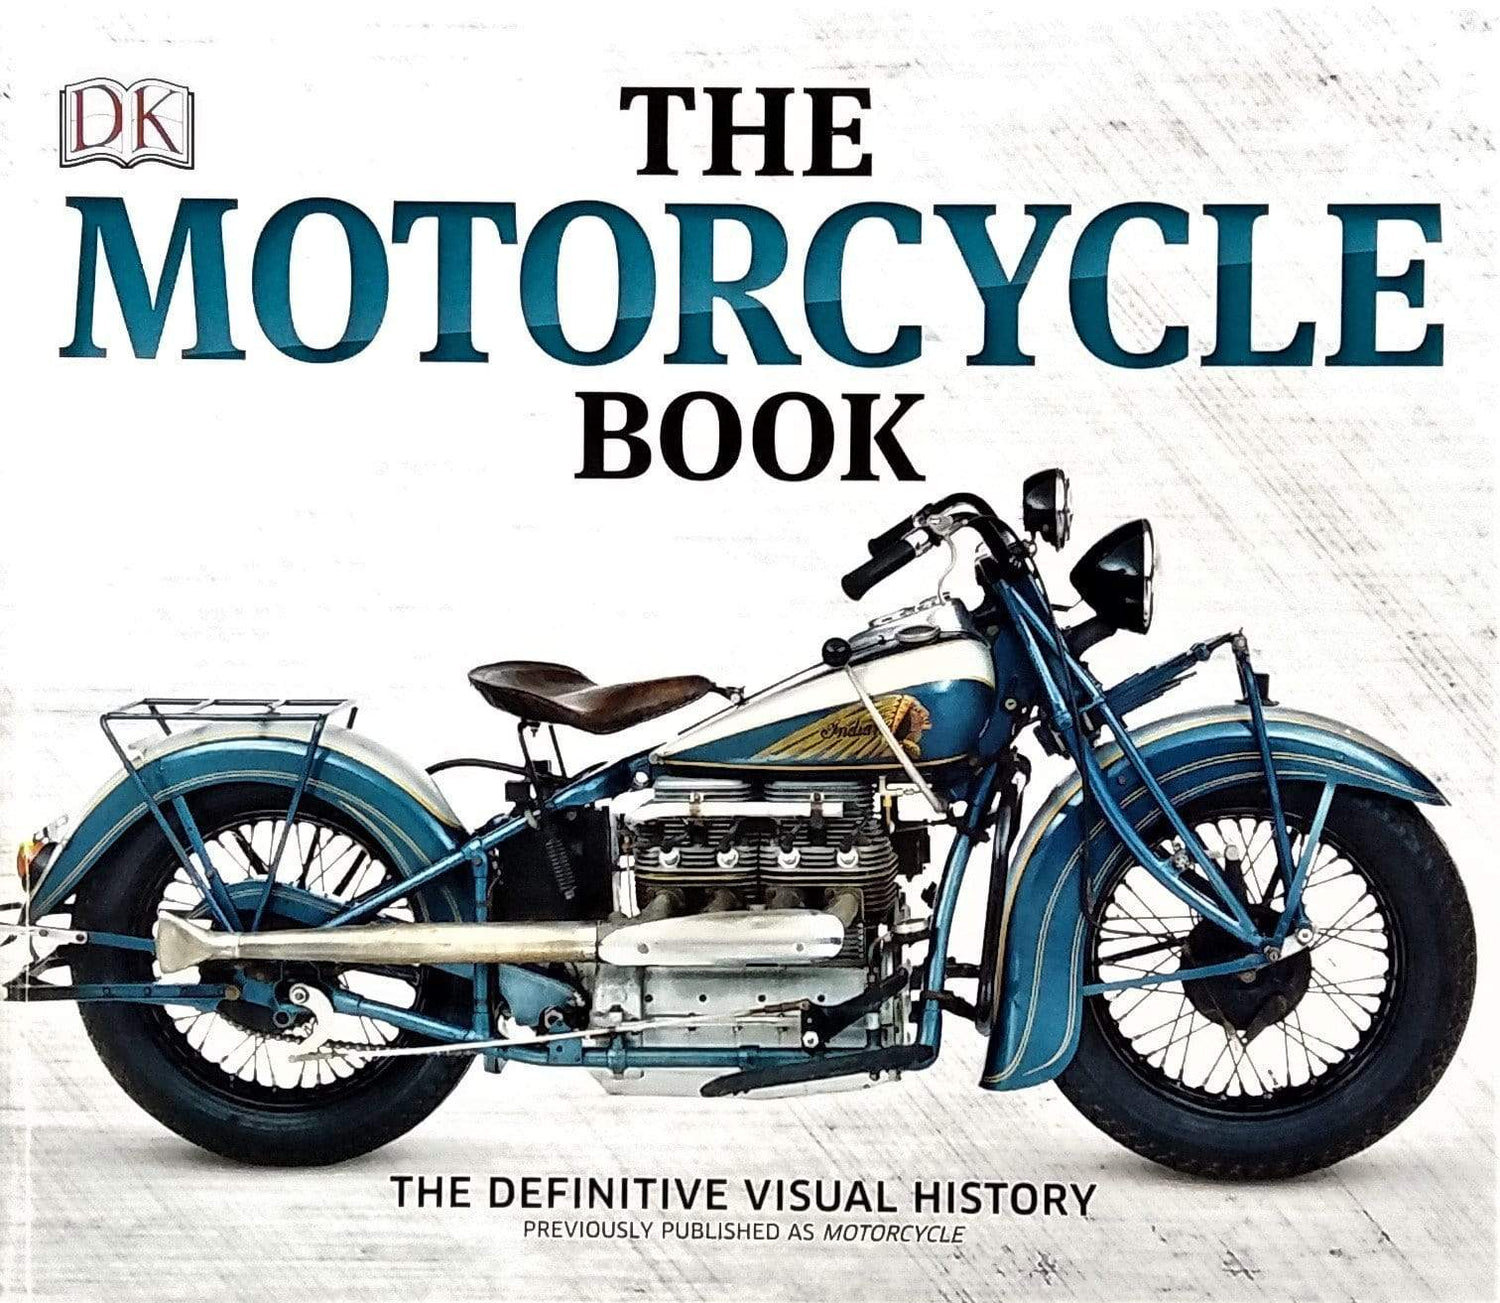 The Motorcycle Book - The Definitive Visual History